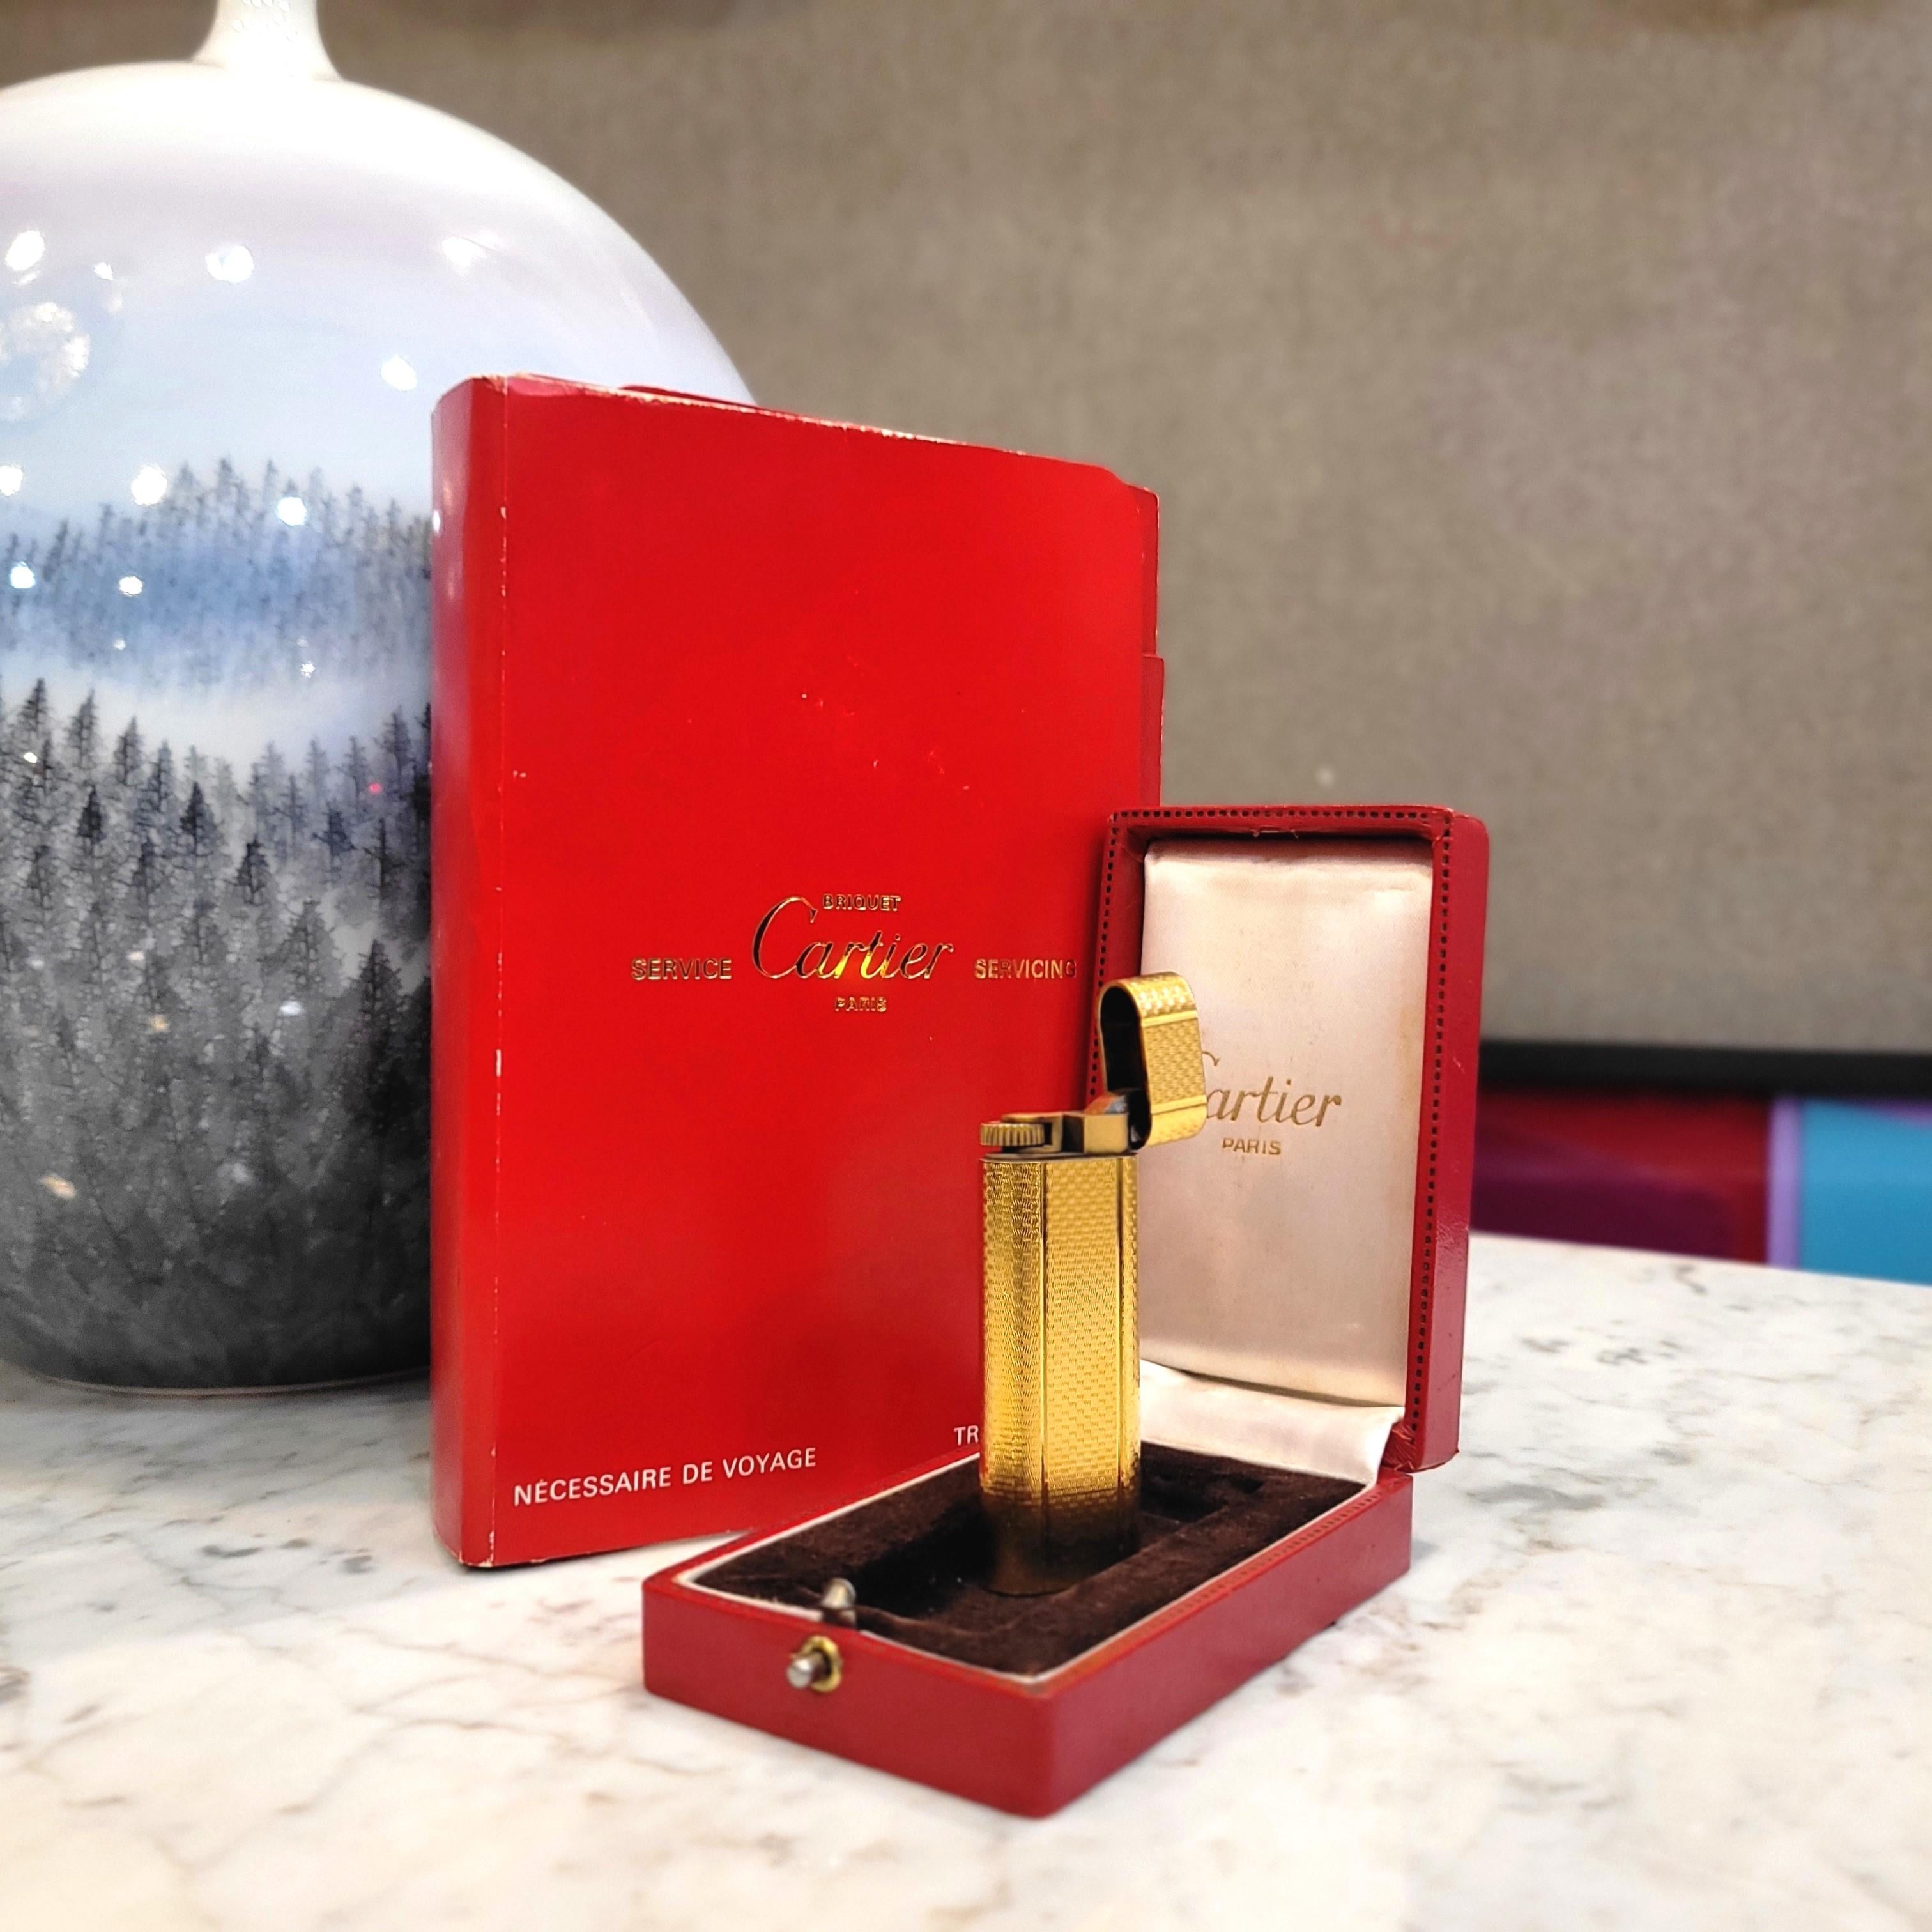 Gorgeous and Excellent luxury lighter from the prestigious brand Cartier, with 18-karat yellow gold plating. As an ornament, it presents a delicate motif of fine vertical wavy lines on all its faces.

On the base there are the authenticity marks of